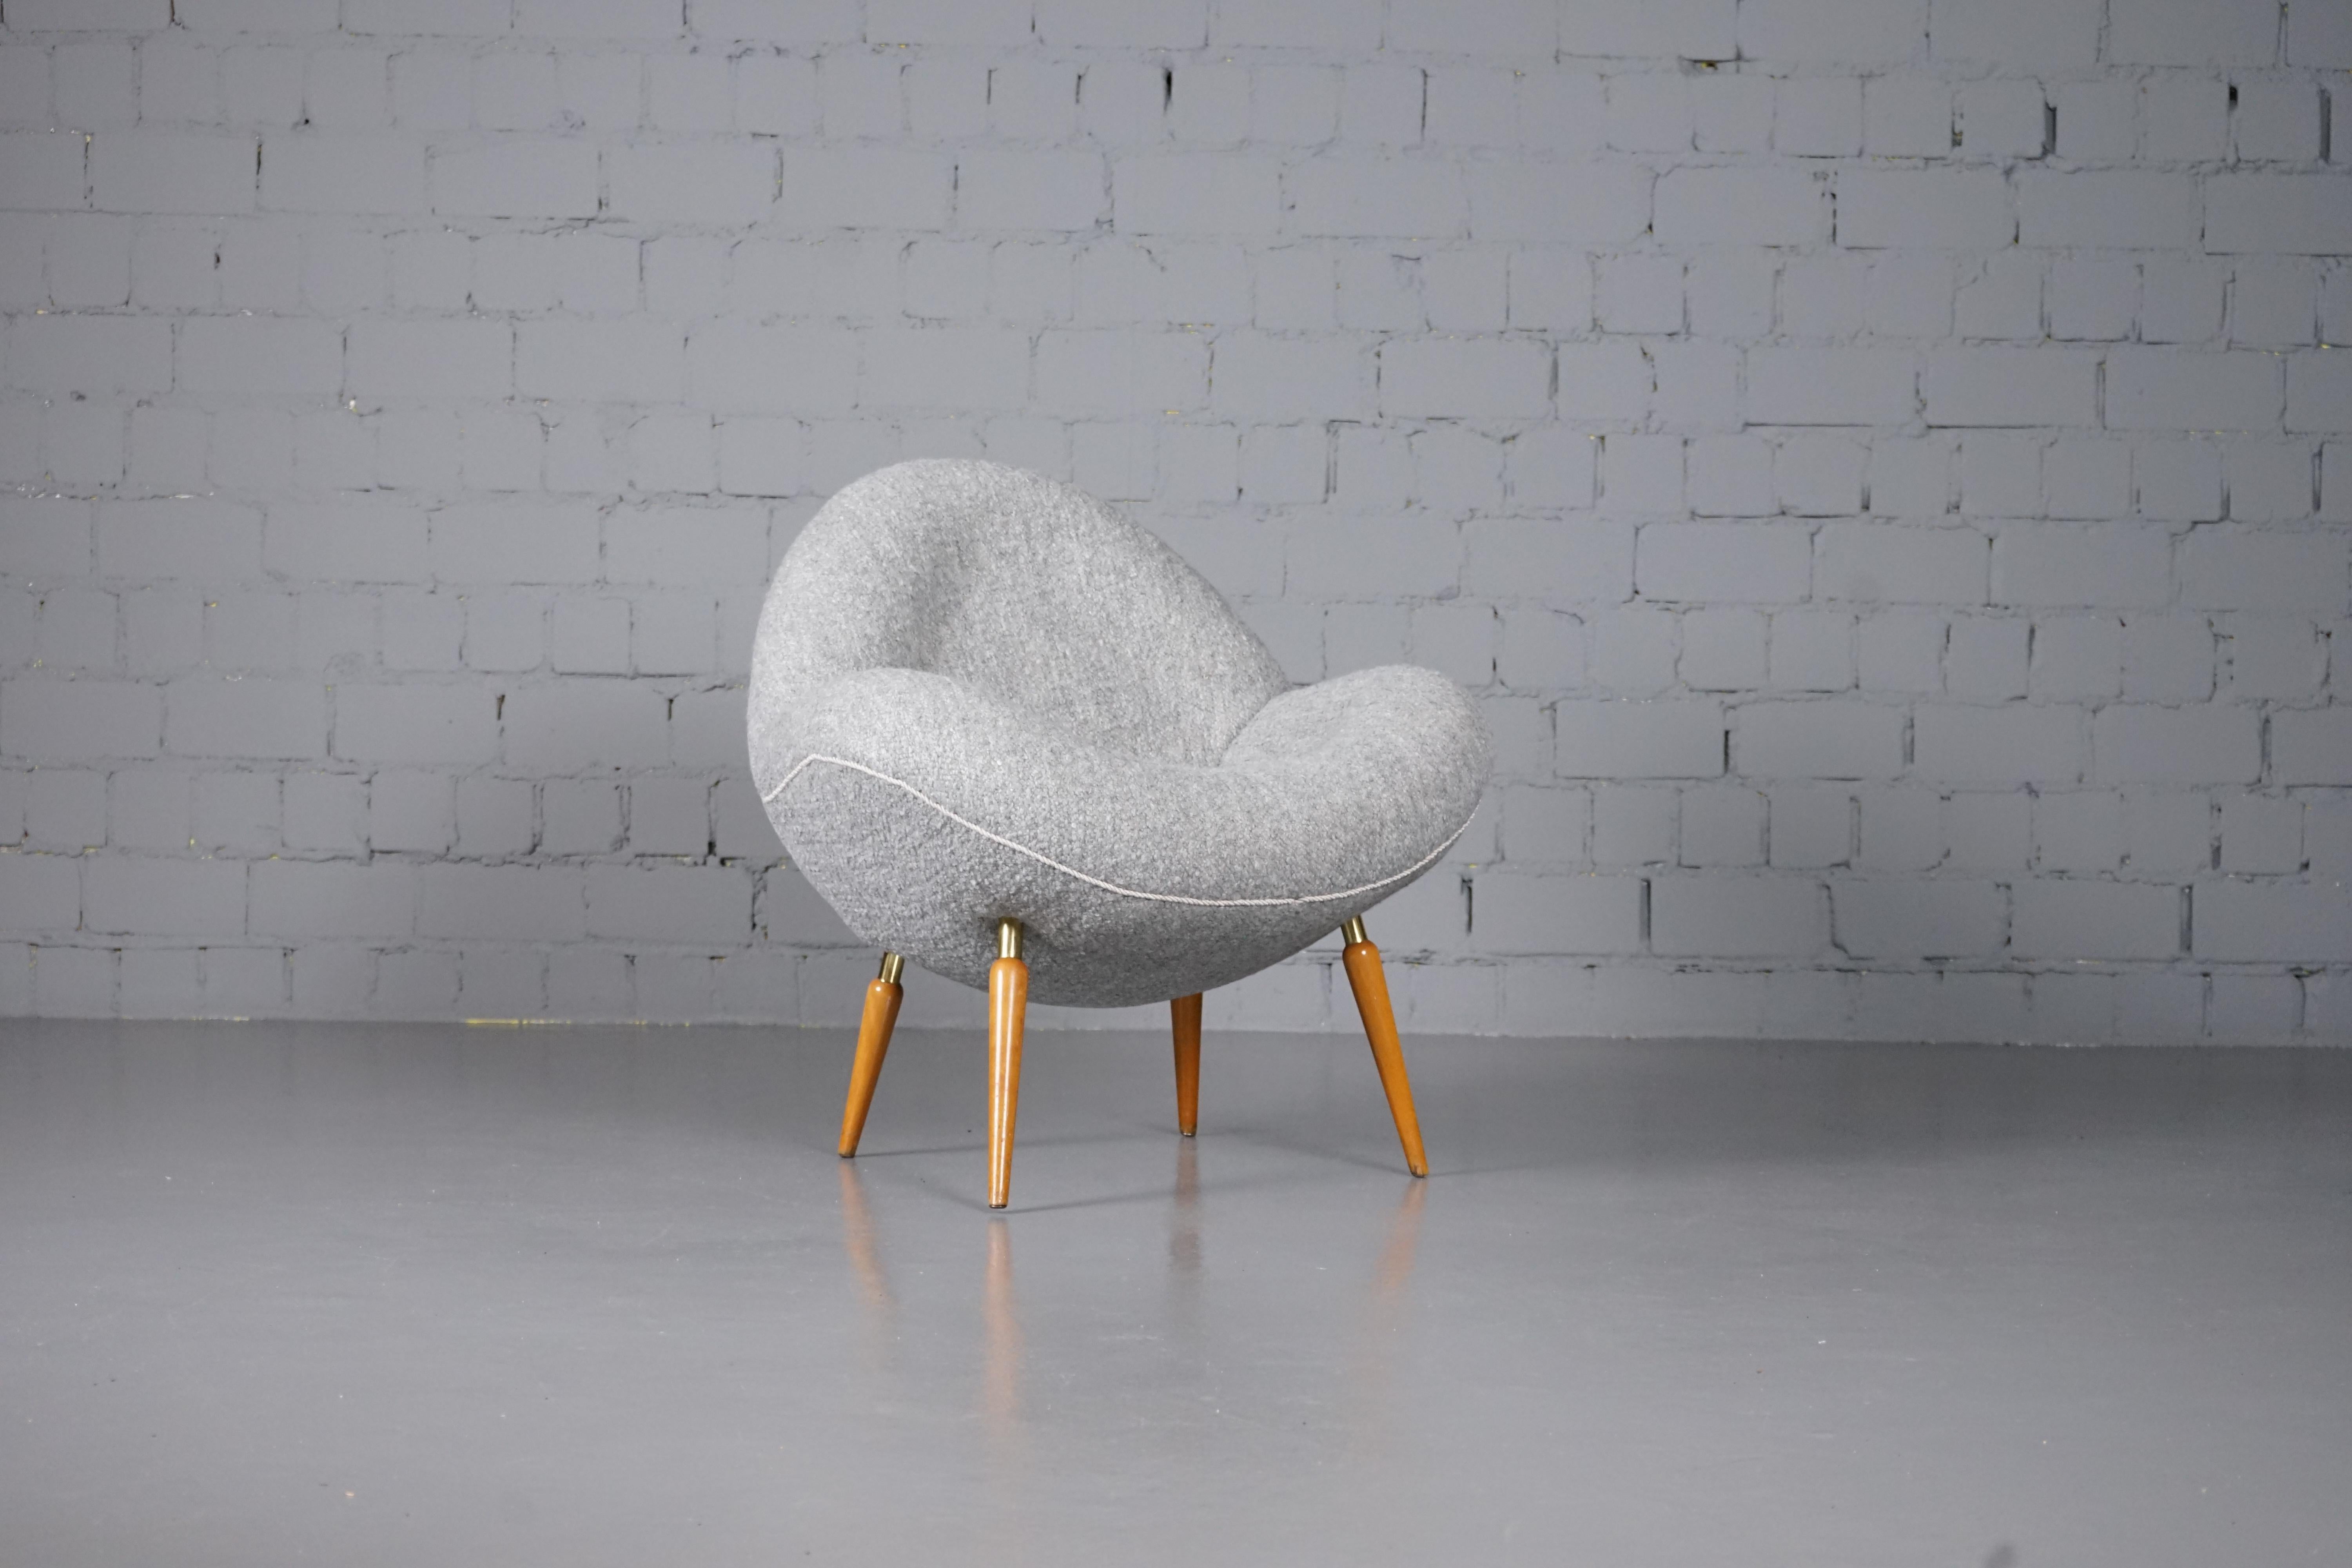 Beautiful and cozy Lounge chair by Fritz Neth for Correcta Sitzformbau, Germany from the 1950`s.

New Upholstery In High Quality Grey Boucle Fabric By Dedar, Milano

A rich textural bouclé fabric interpreted in mélange colours is enlivened by